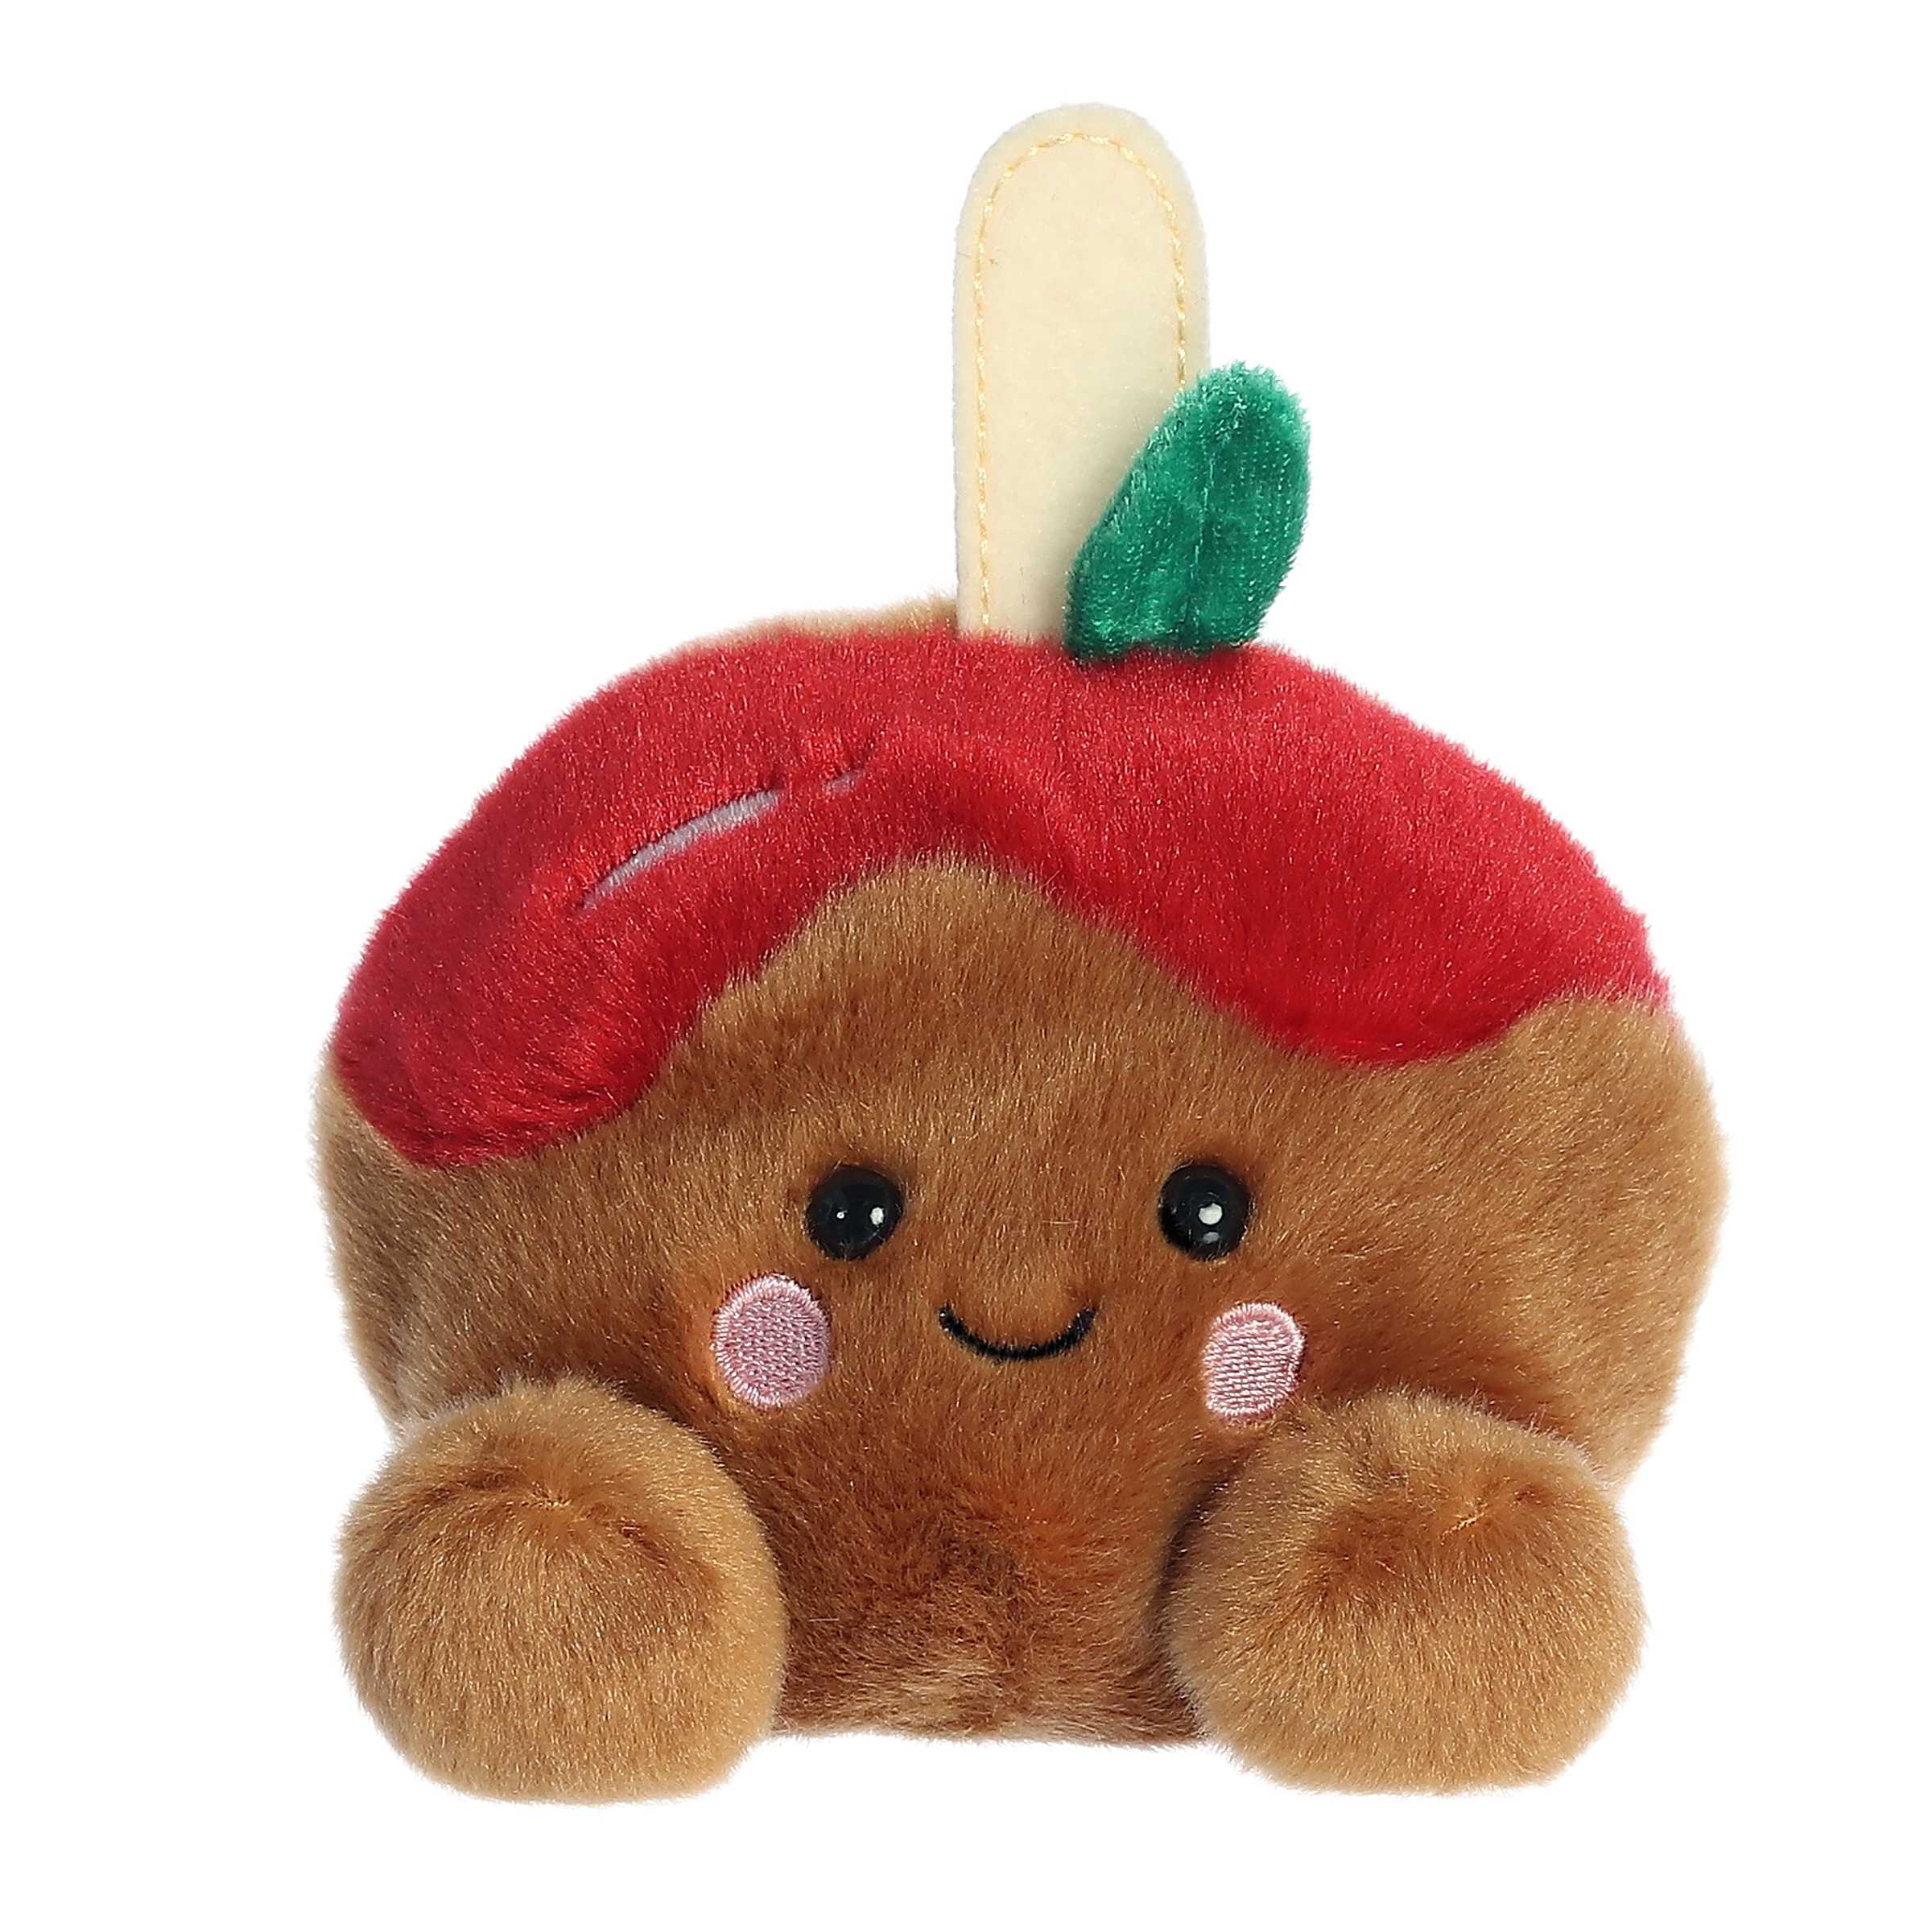 A delightful red apple plush on a stick that has been dipped in a sticky brown caramel sauce and a blushing smile